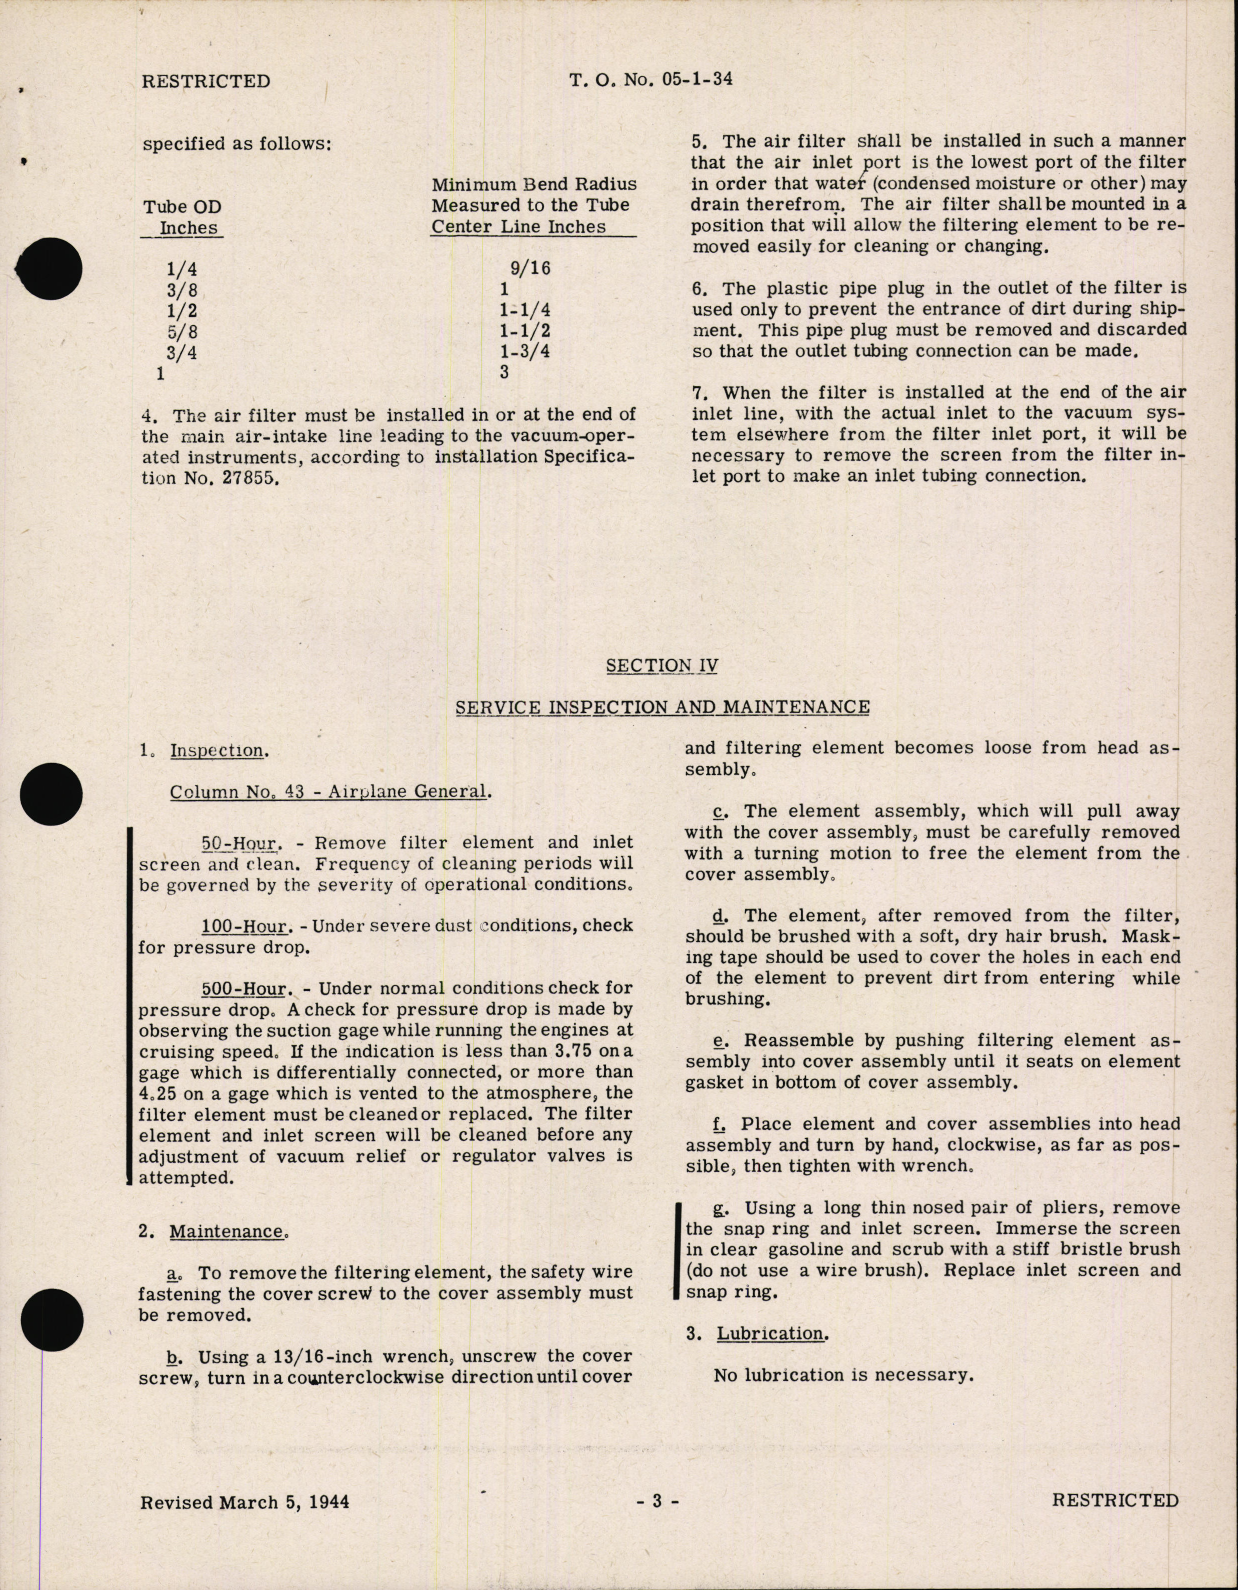 Sample page 7 from AirCorps Library document: Handbook of Instructions with Parts Catalog for Type PA-12 Air Filter